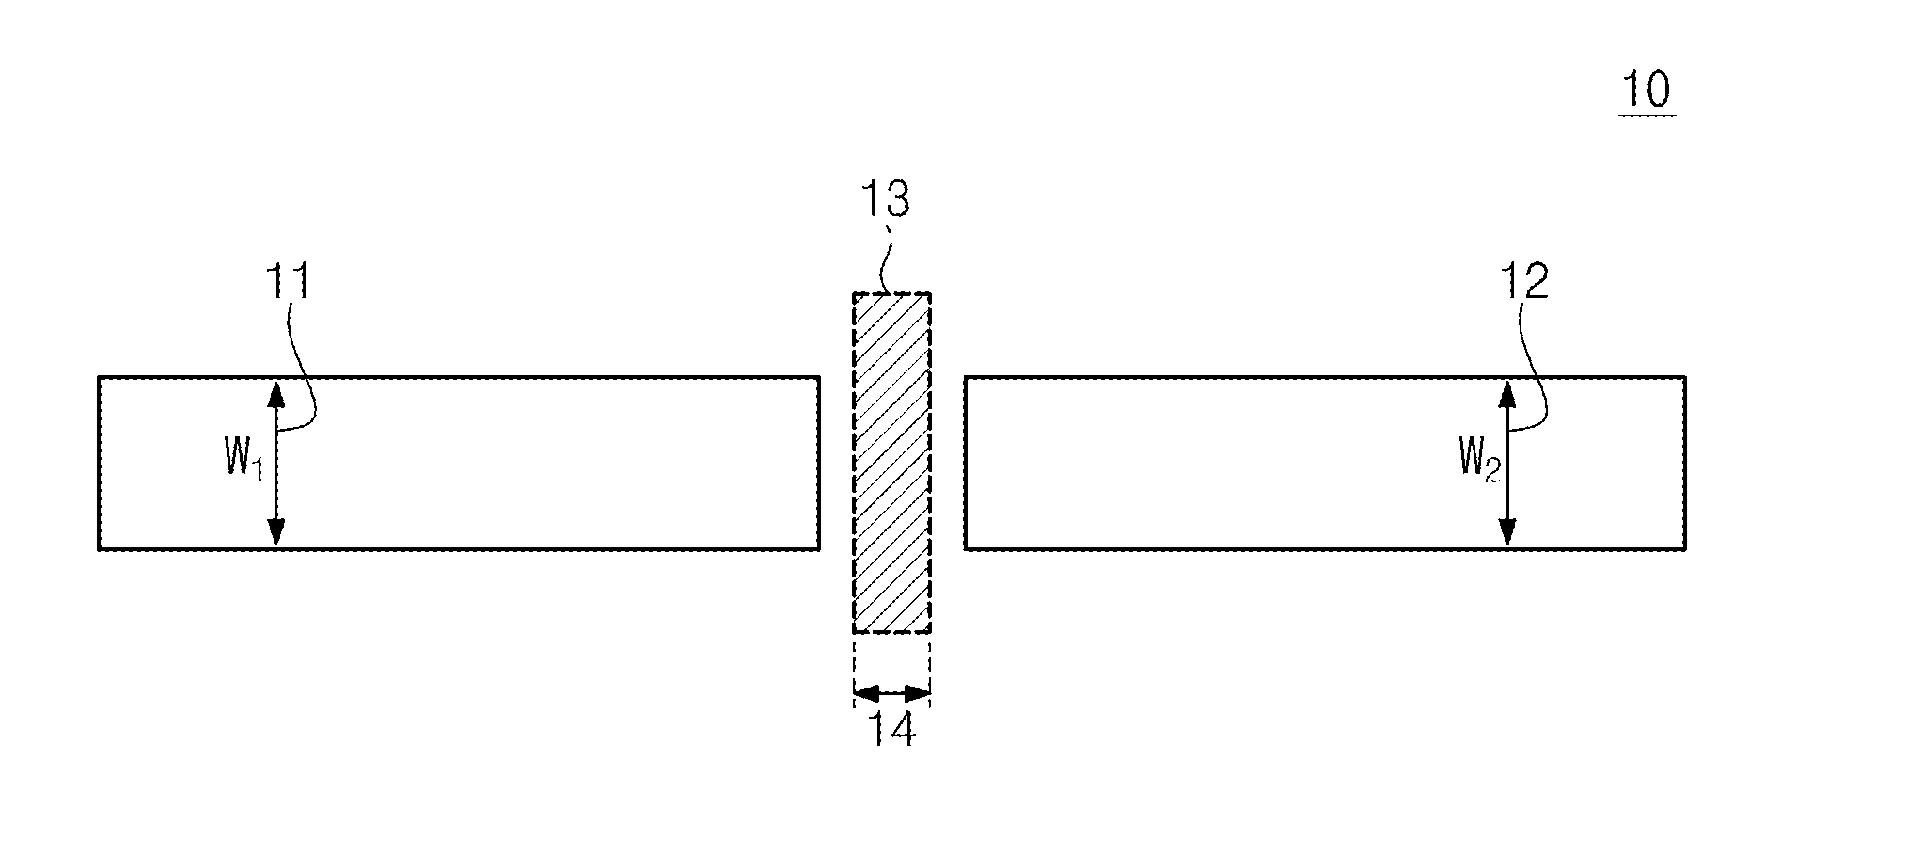 Core and optical waveguide